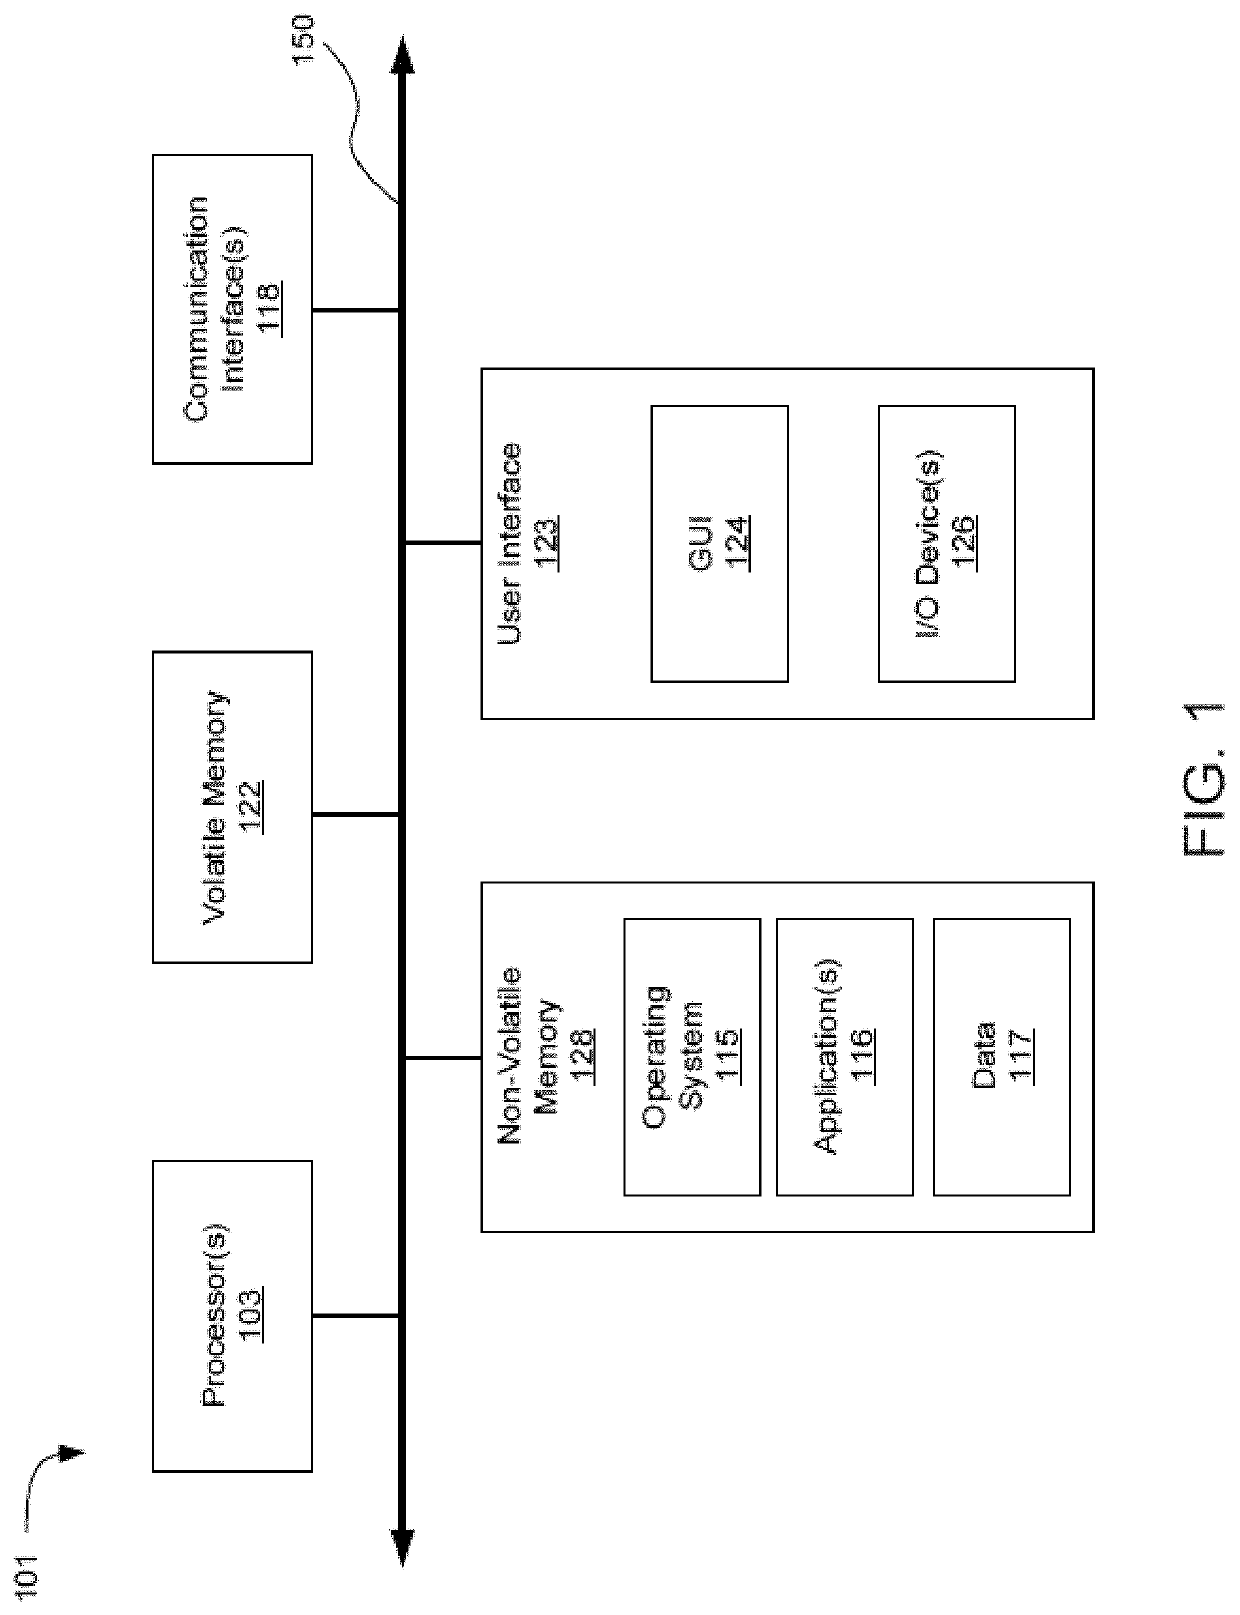 Systems and methods for transparent saas data encryption and tokenization